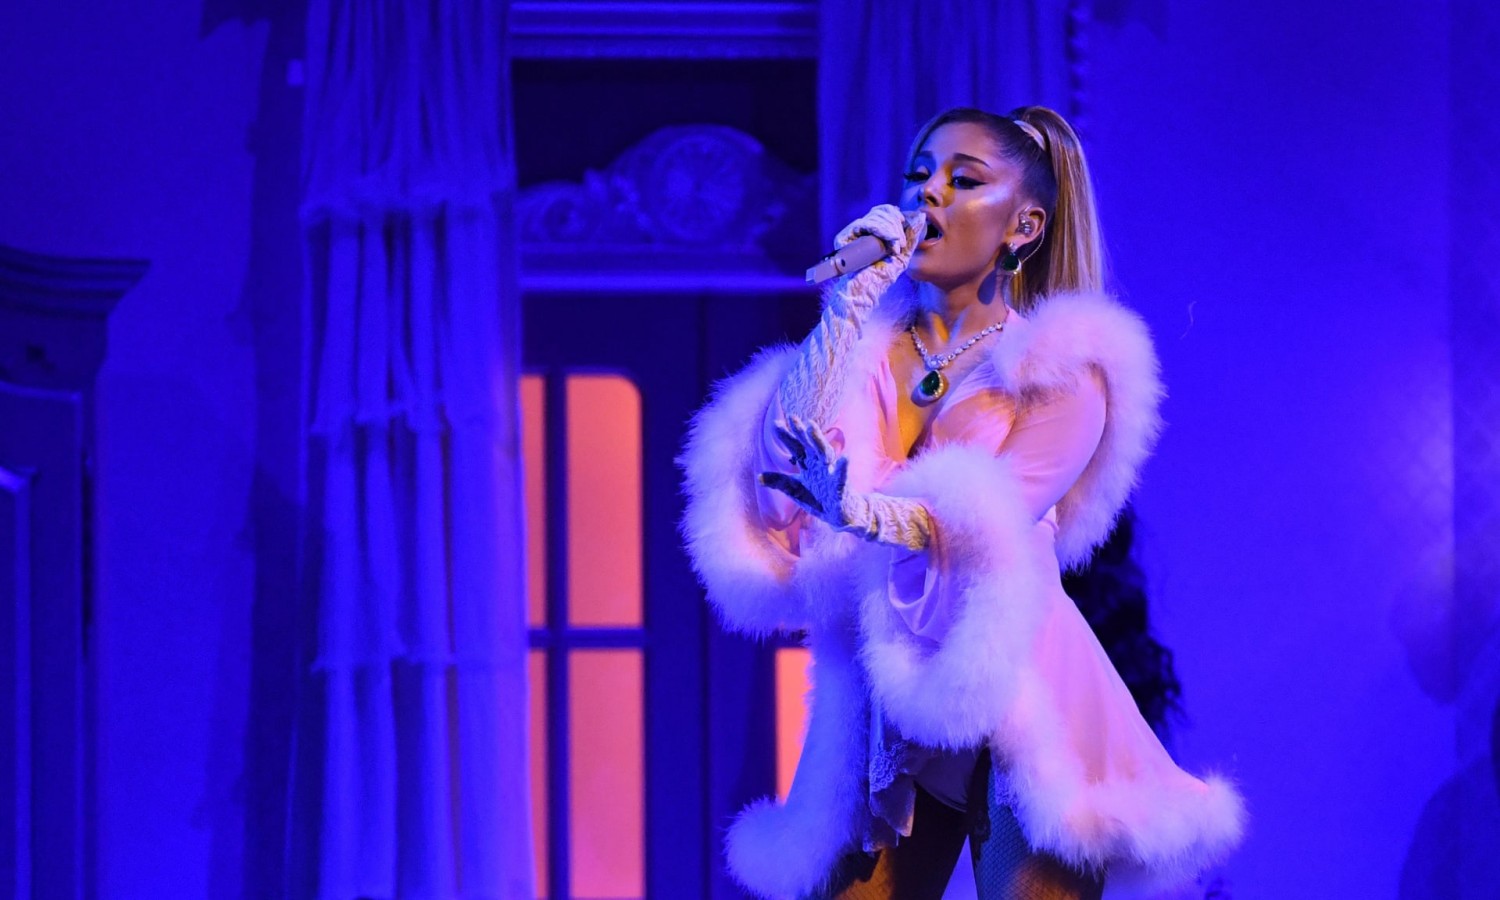  Ariana Grande performs 7 Rings. Photograph: Robyn Beck/AFP via Getty Images